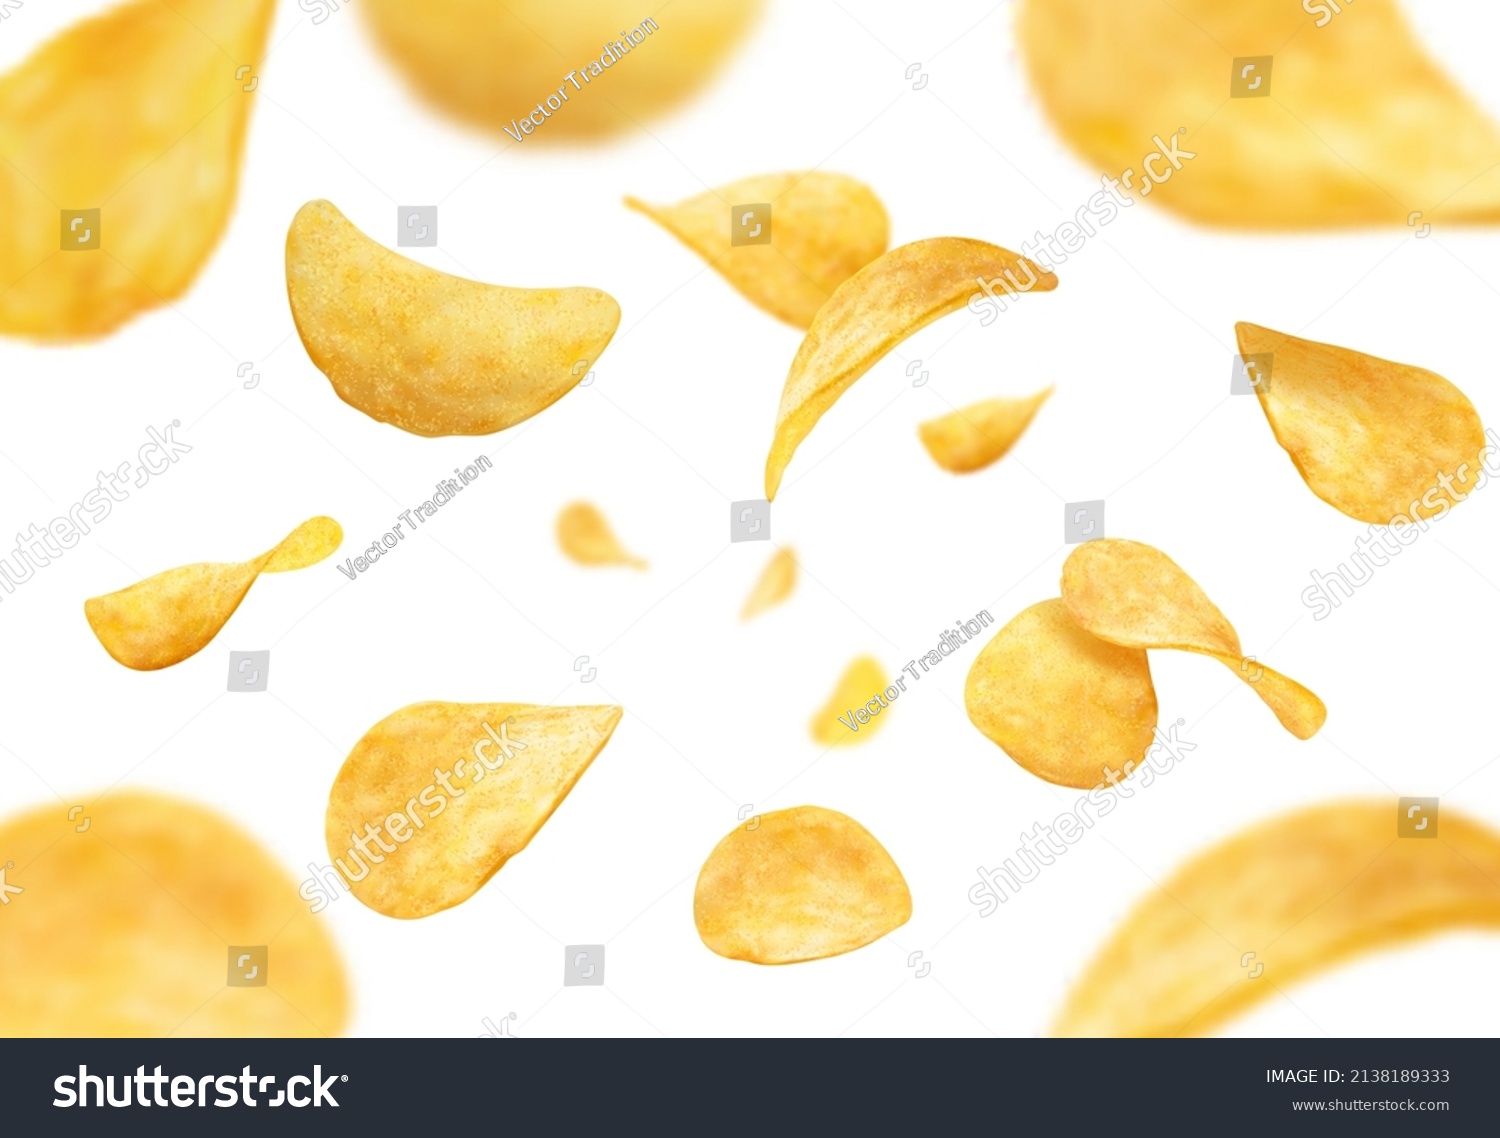 Flying and falling crispy wavy potato chips realistic vector background. Thin crunchy slices of fried potato vegetable with salt and spices 3d backdrop of fast food snacks and crisps #2138189333